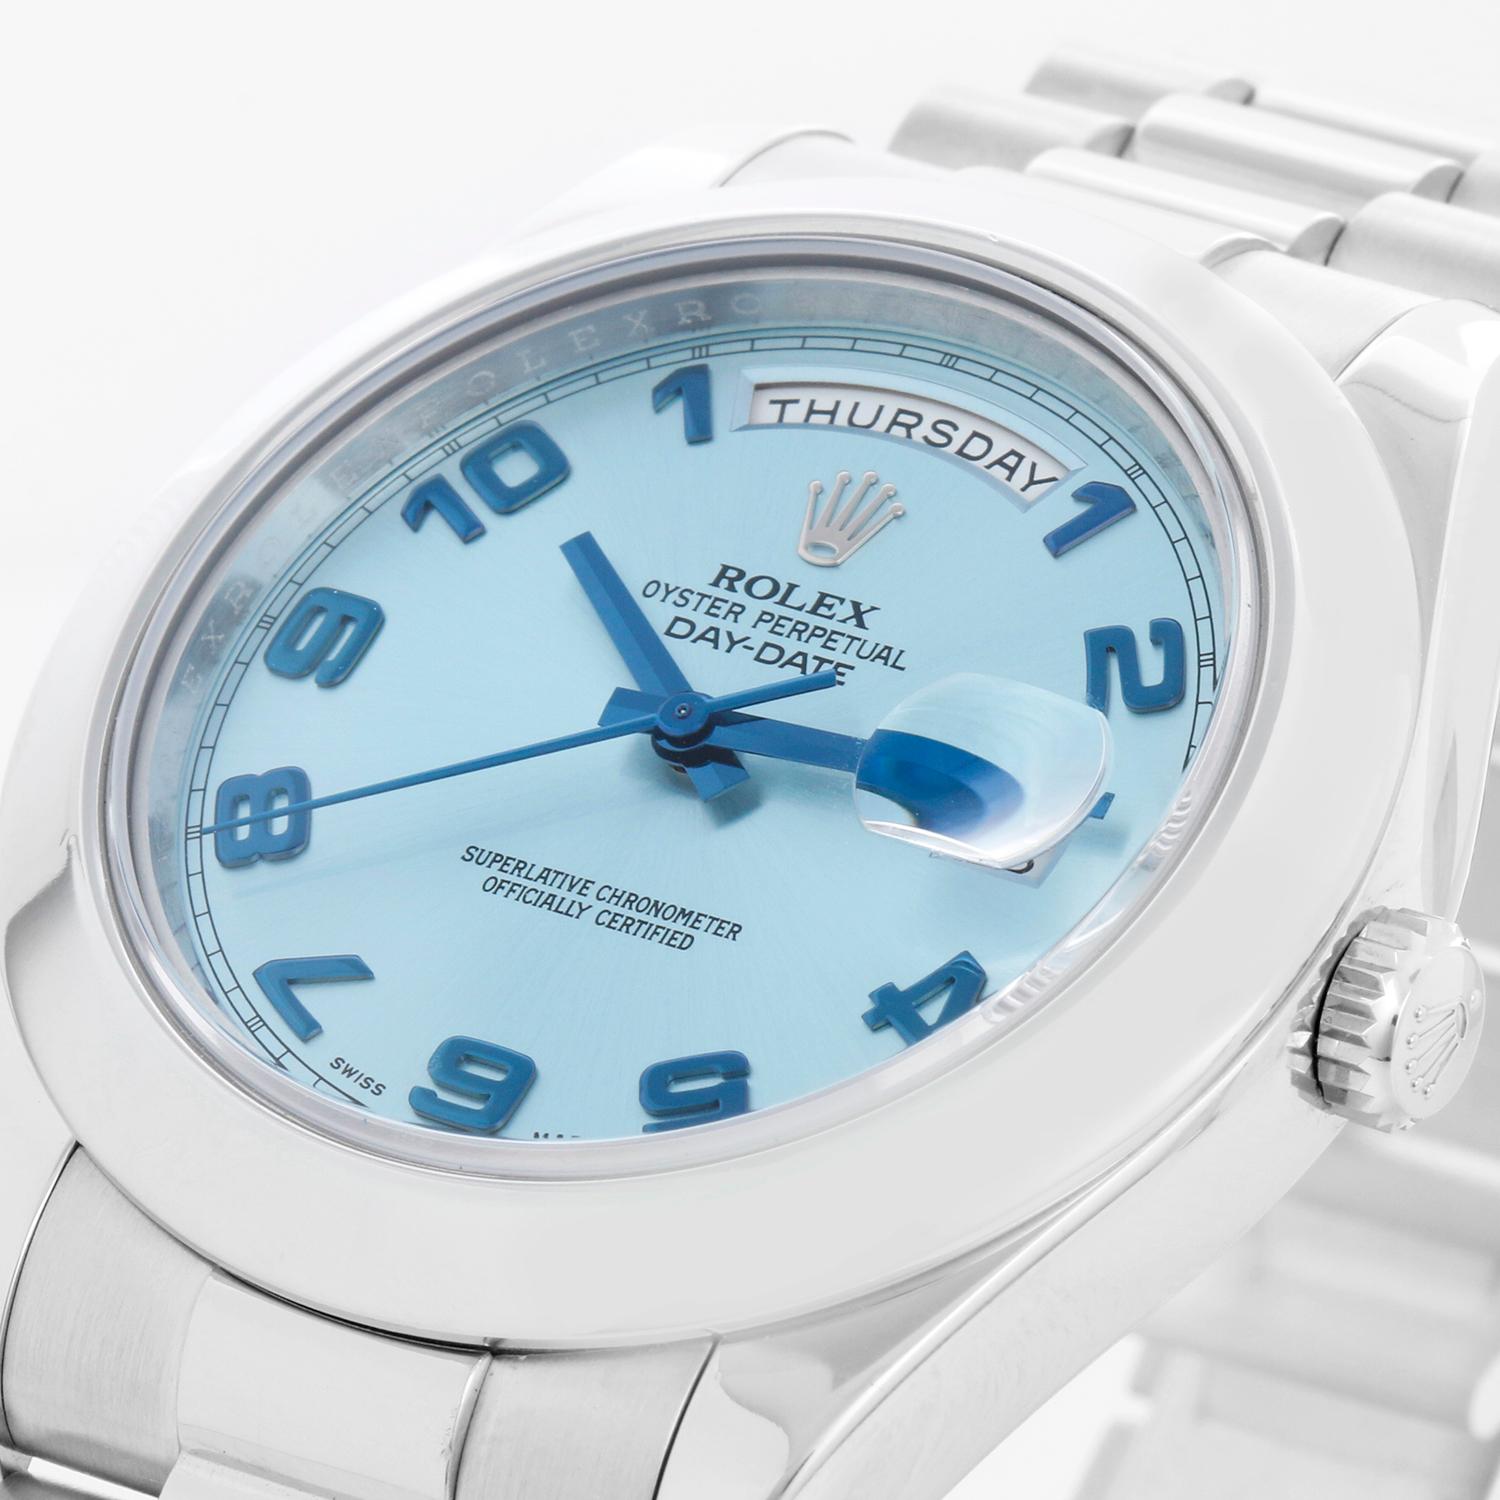 Rolex Day-Date II President Men's Platinum Watch Glacier Blue Dial 218206 - Automatic winding with day and date; 31 jewels; sapphire crystal. Platinum case with smooth bezel (41mm diameter). Glacier blue dial with Arabic numerals. Platinum President